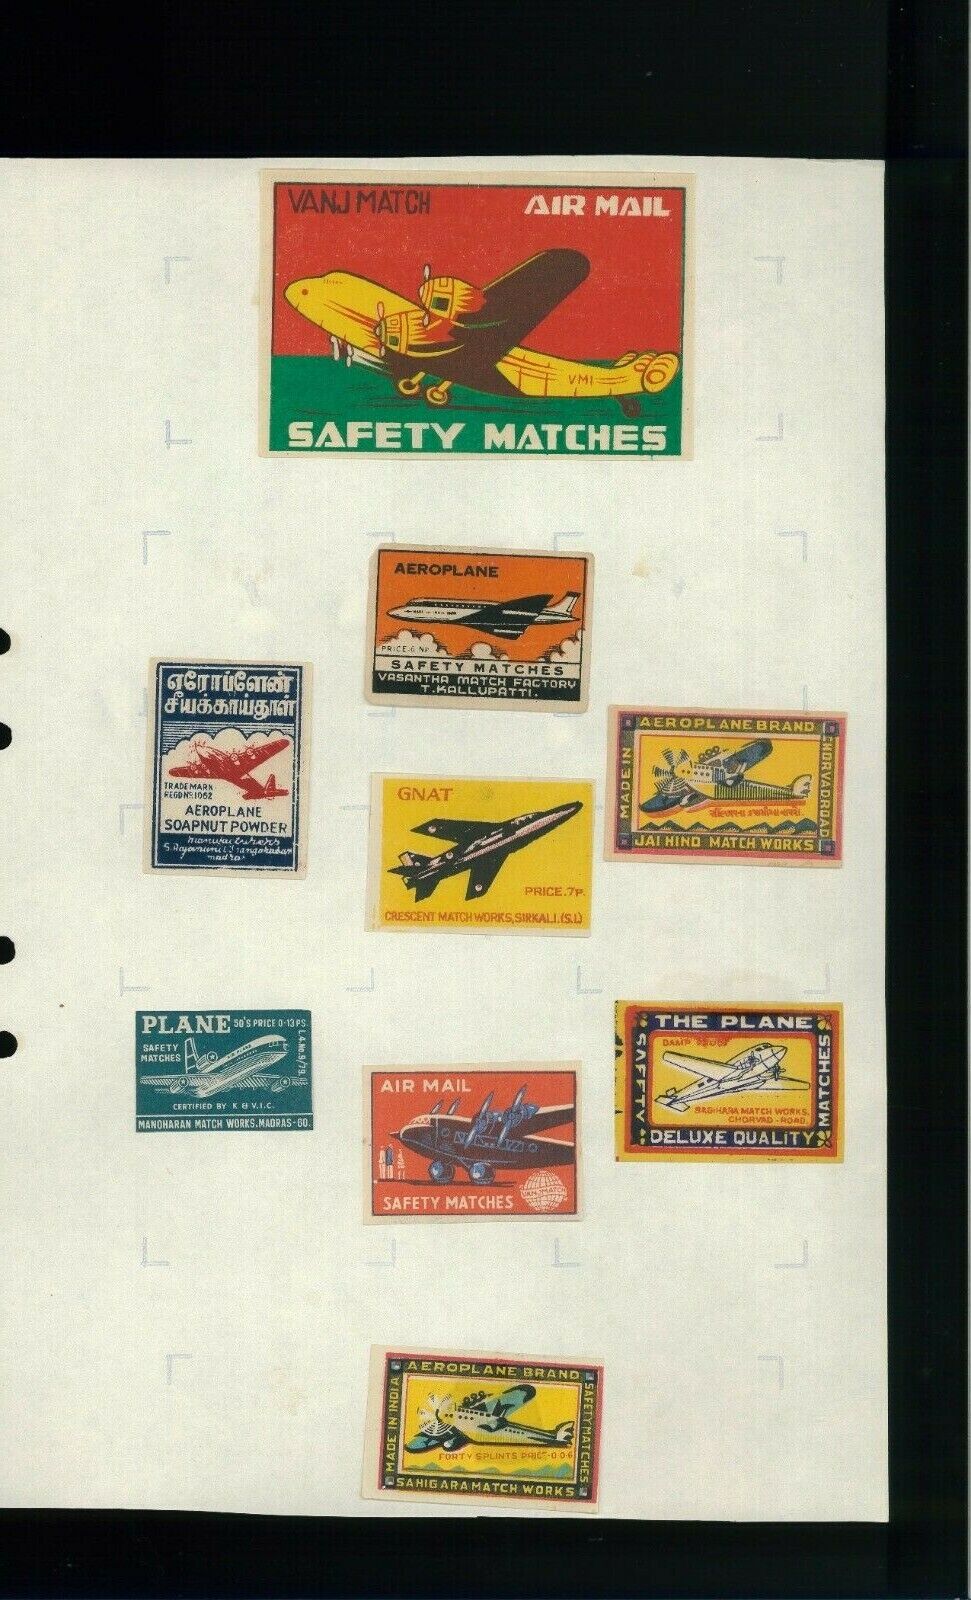 Airplane Stickers/Cinderellas from Match Boxes from India. Net 29.95